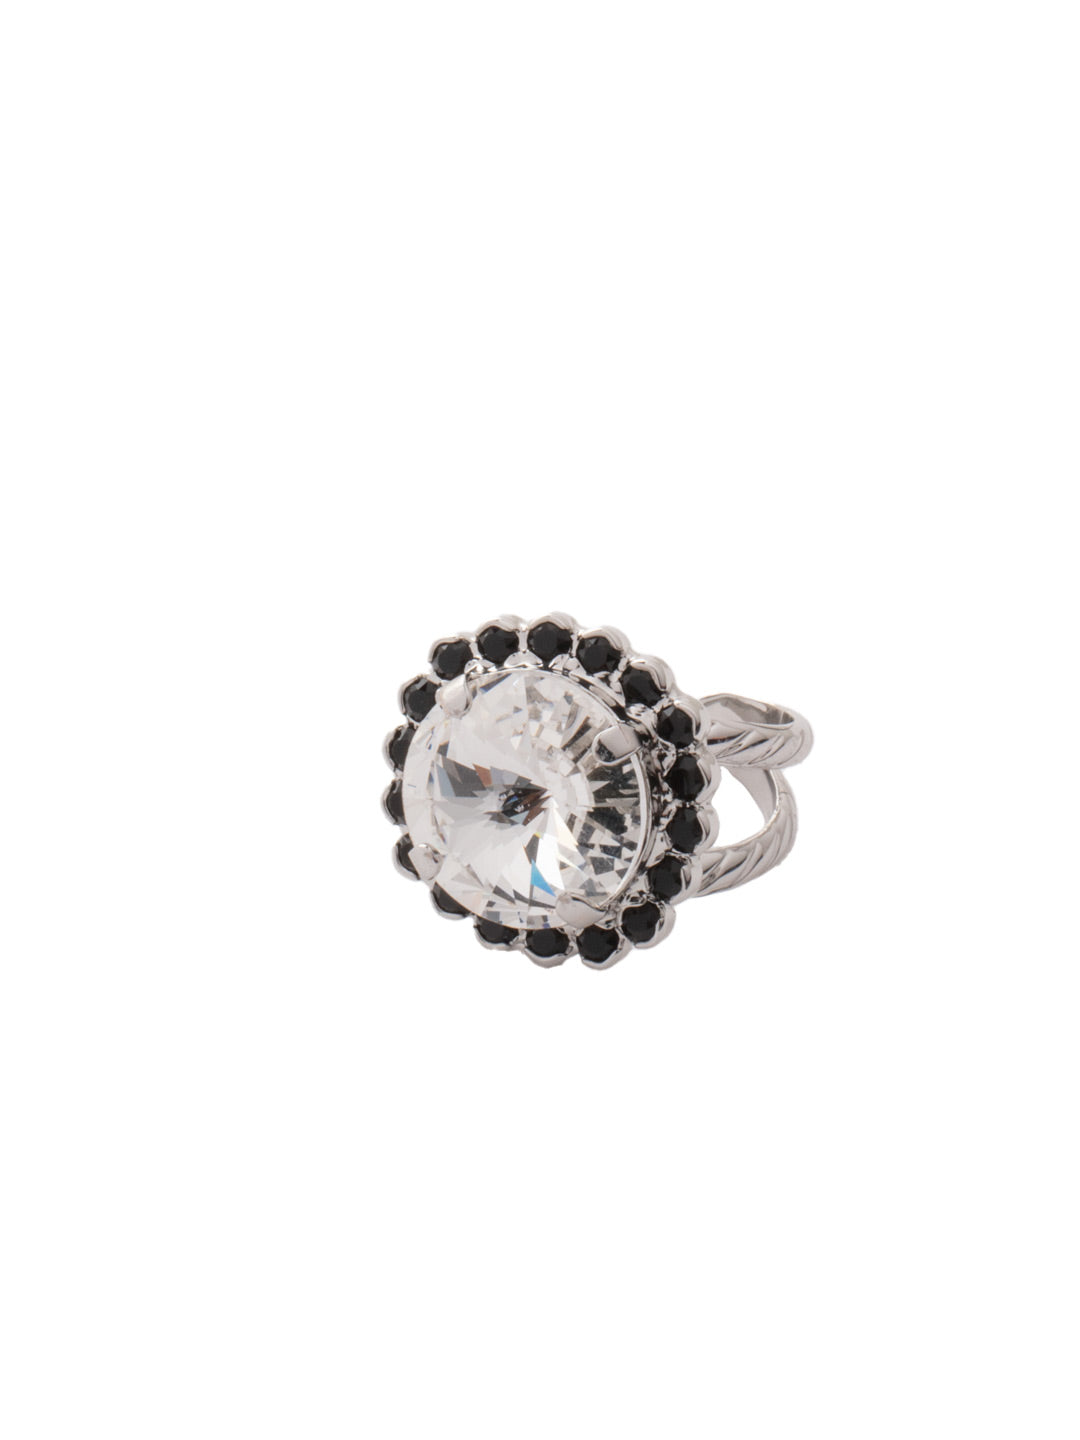 Haute Halo Statement Ring - RDL6PDSNI - <p>A central round crystal with an elegant halo of gems embodies elegance and style. From Sorrelli's Starry Night collection in our Palladium finish.</p>